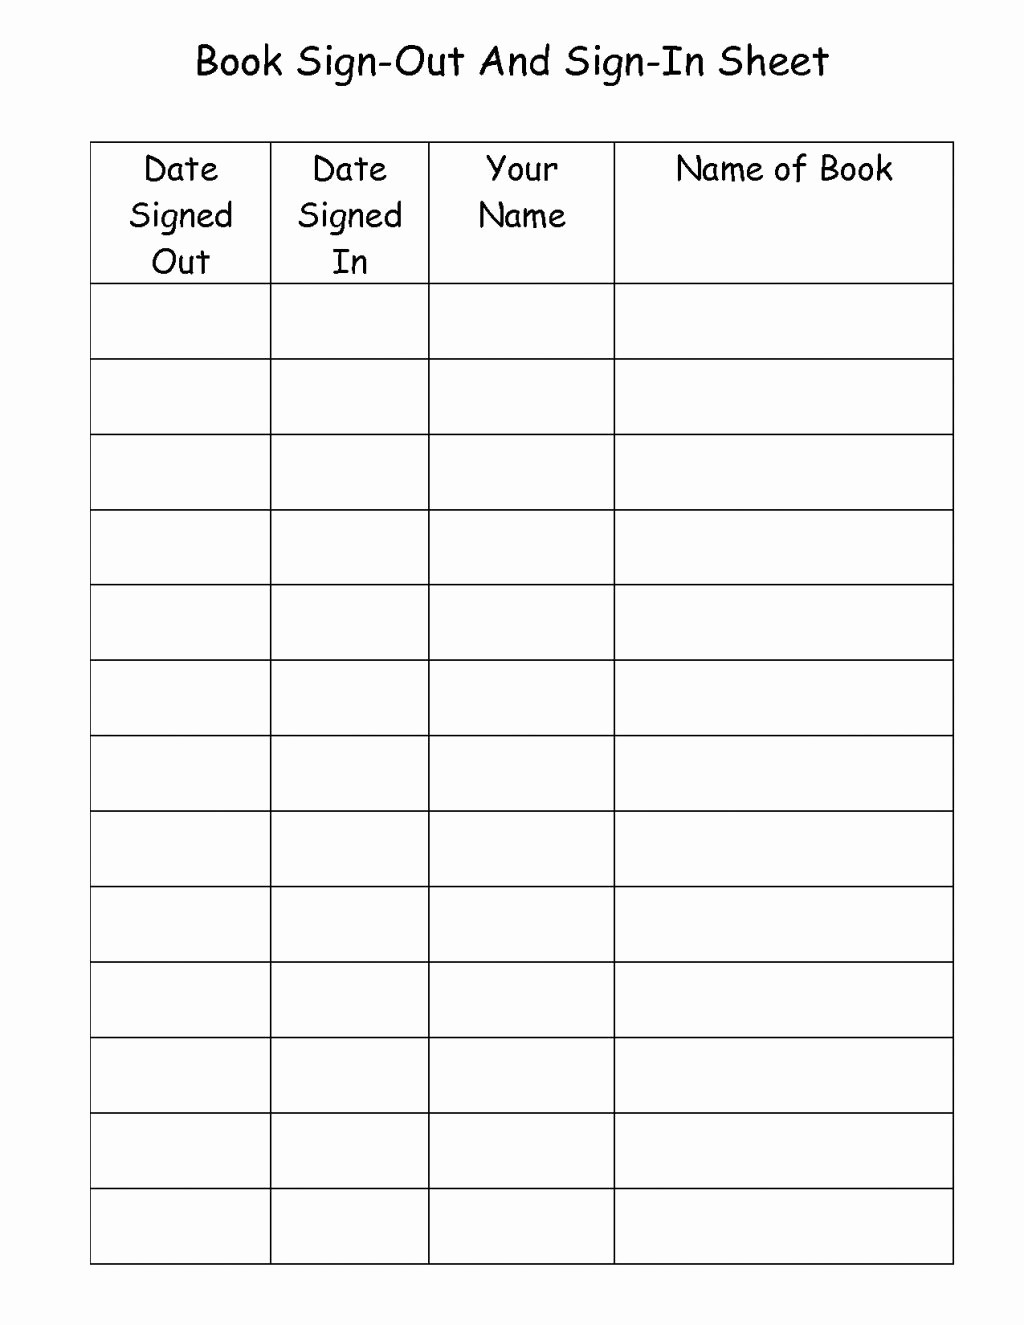 Book Sign Out Sheet Template New Best S tool Sign Out form Equipment Sheet Template